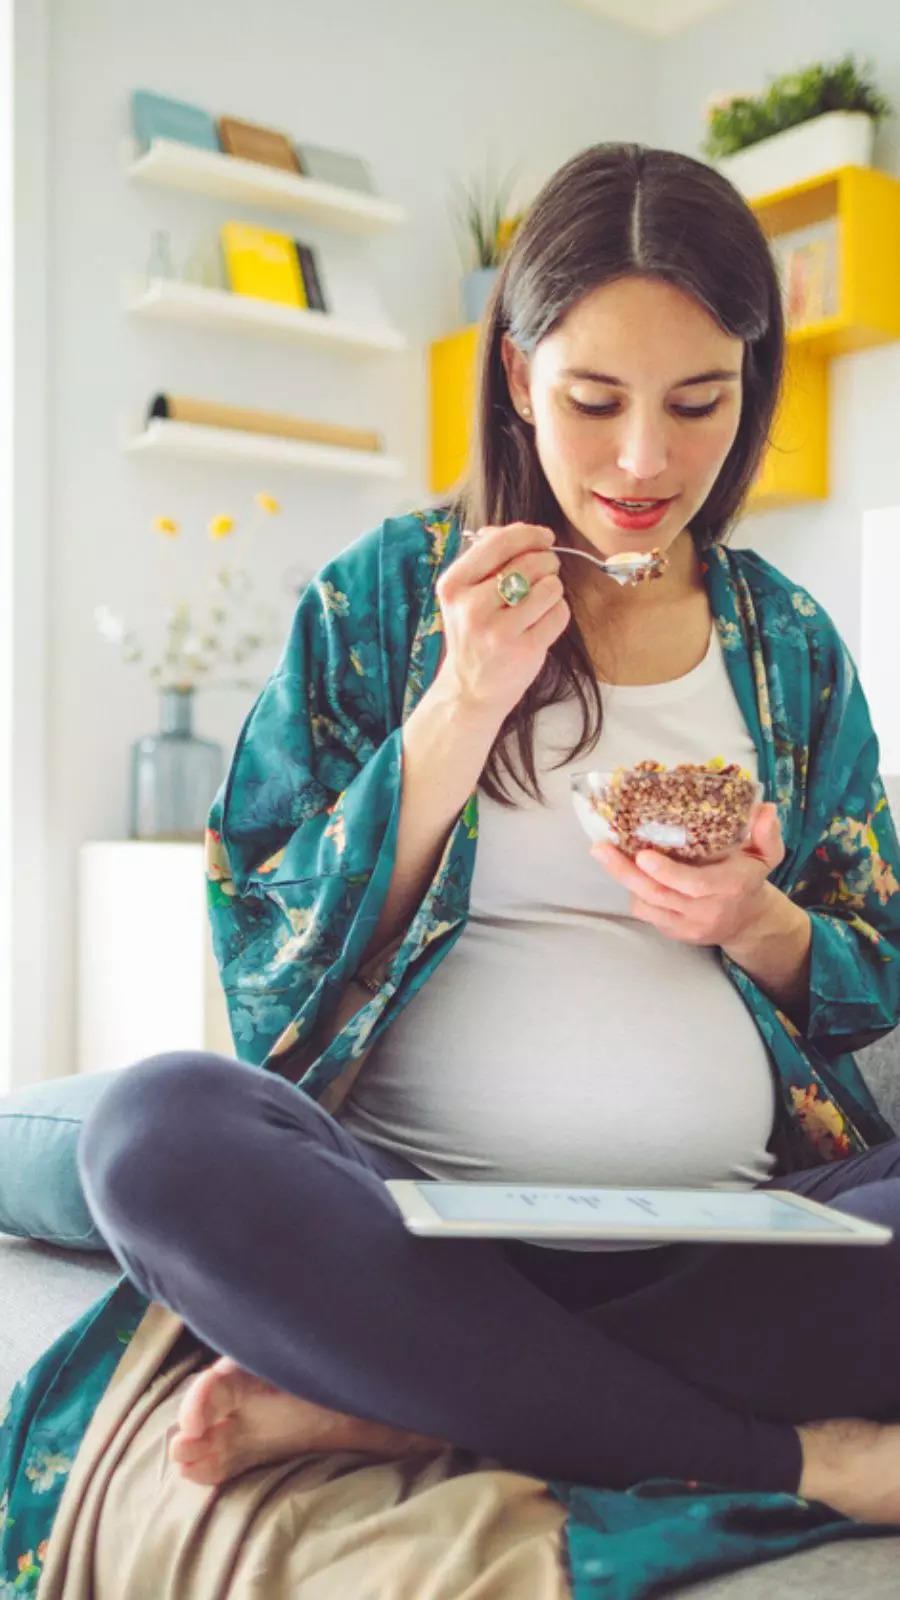 Foods not to eat during pregnancy: 8 things to avoid